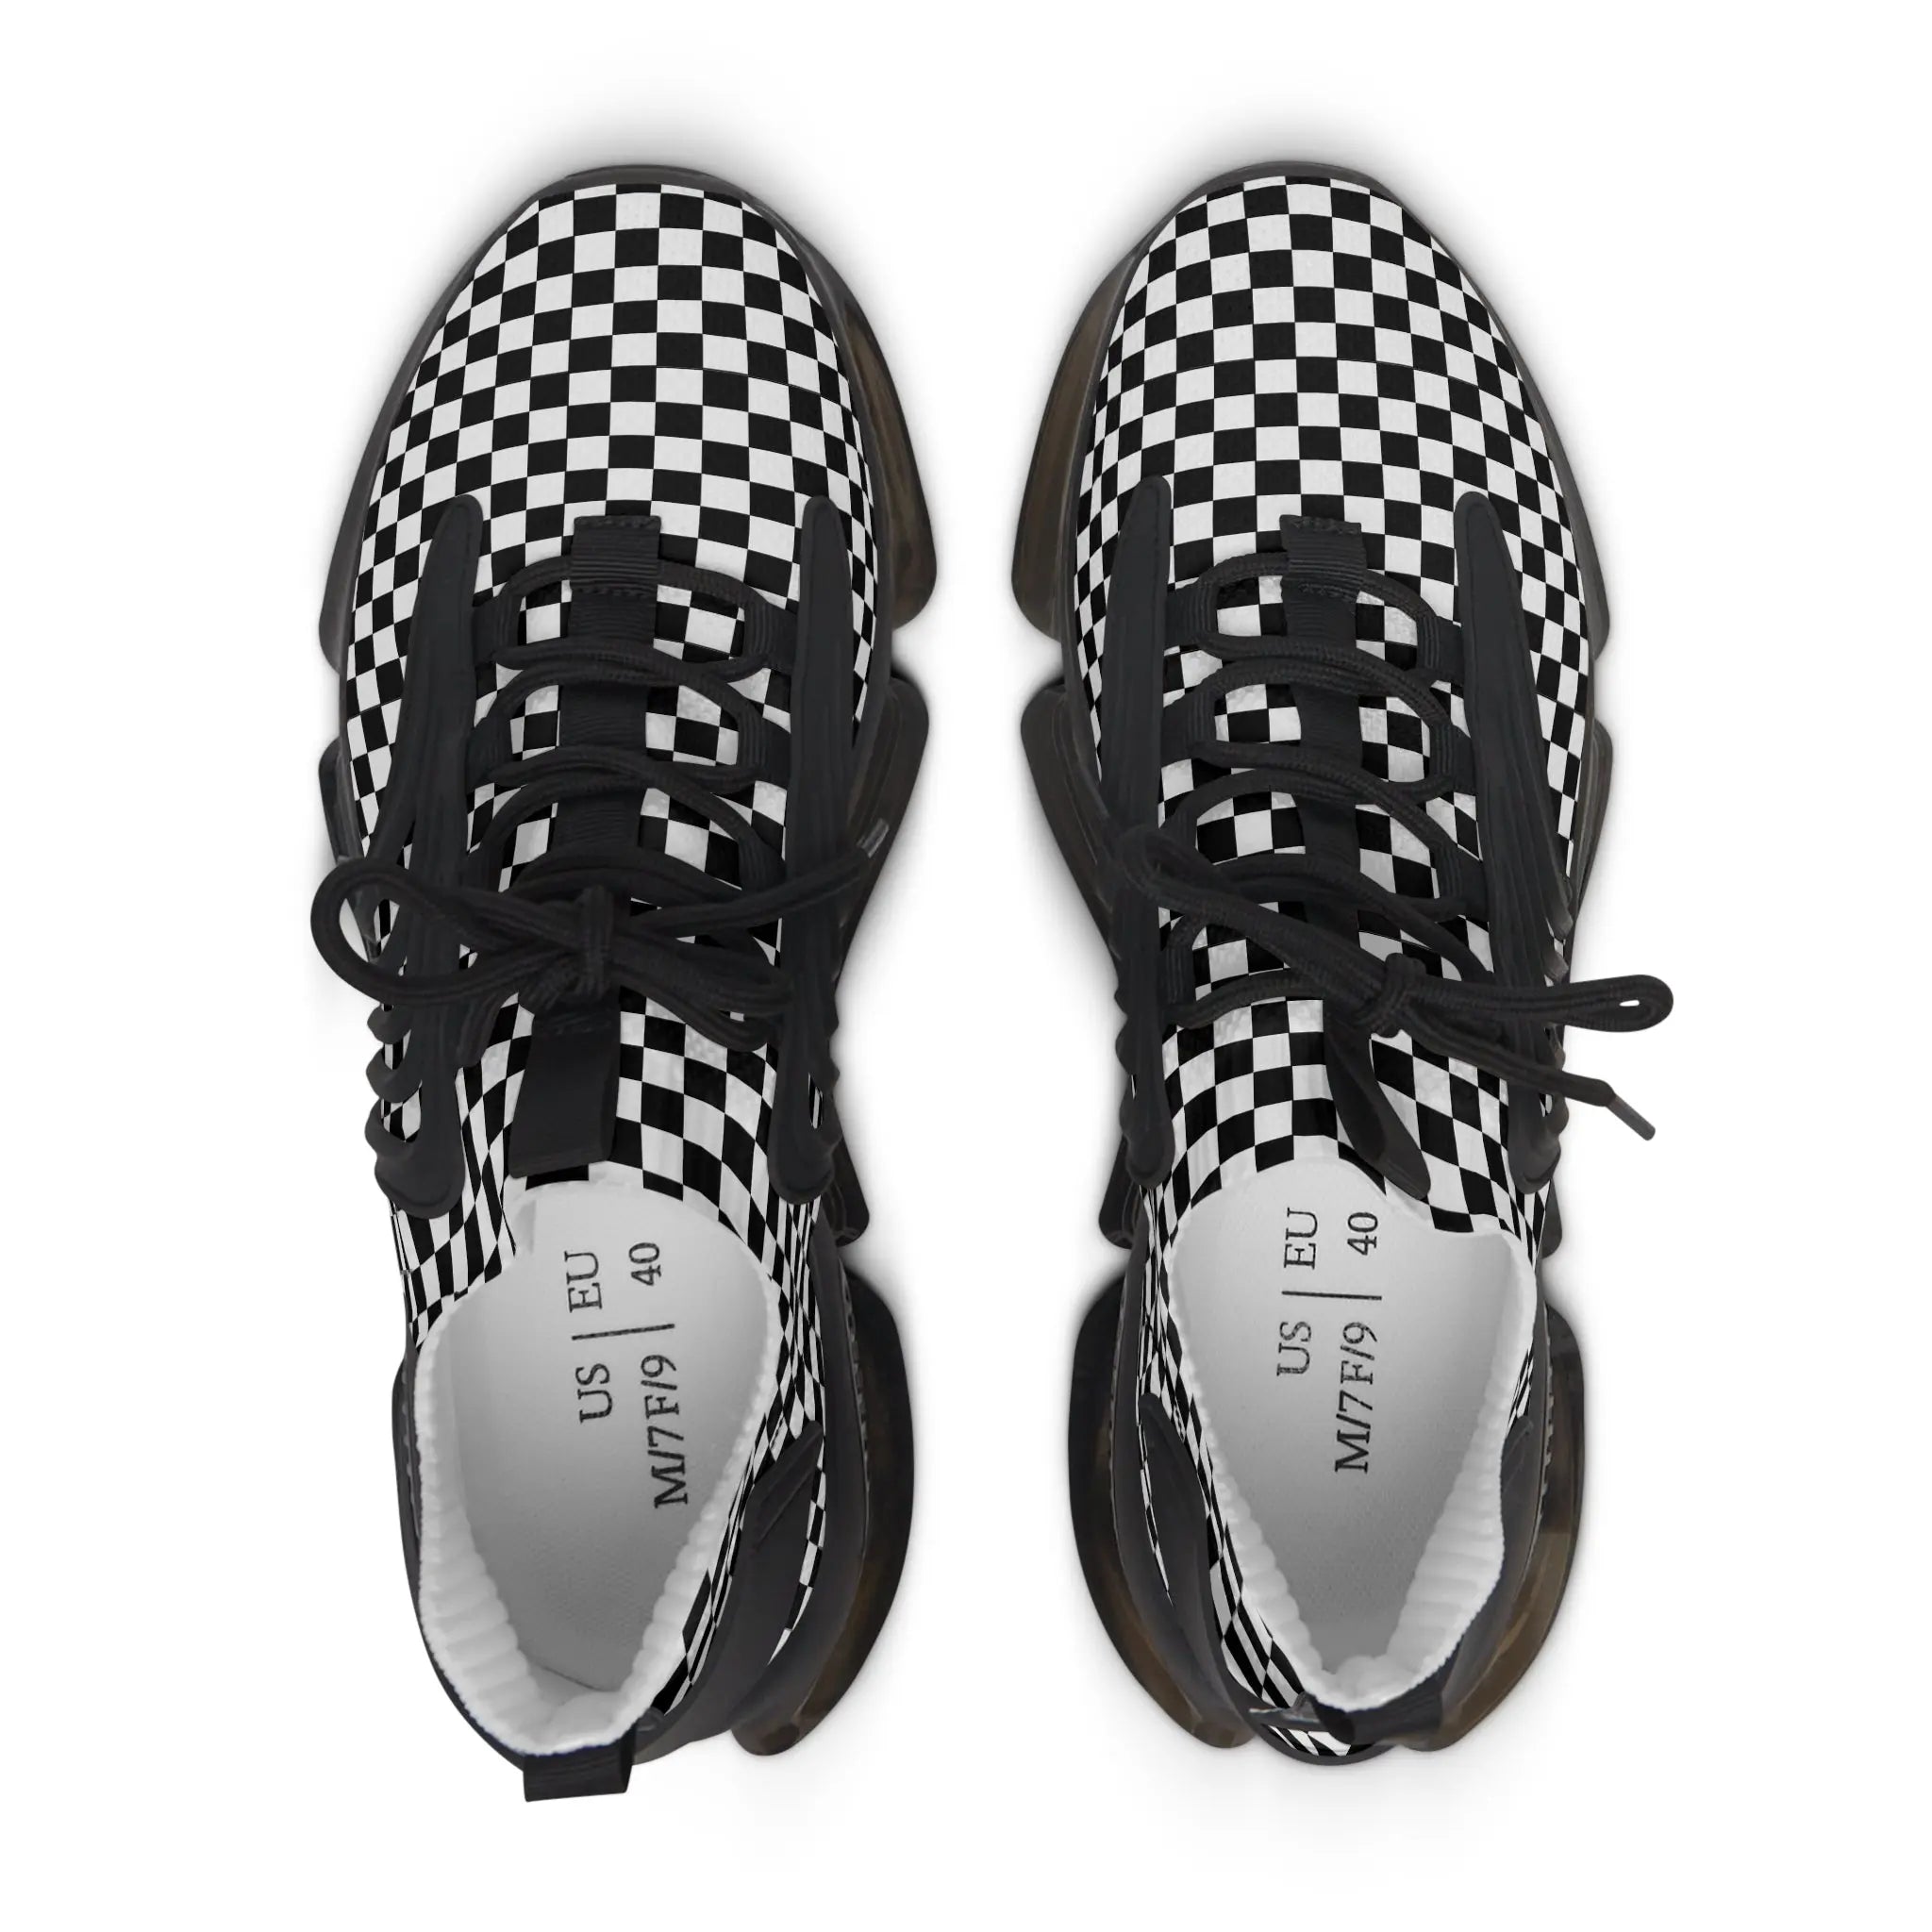 Women's Black and White Check Mate Mesh Sneakers, Women's Athletic Shoes, Casual Sneakers Shoes  The Middle Aged Groove